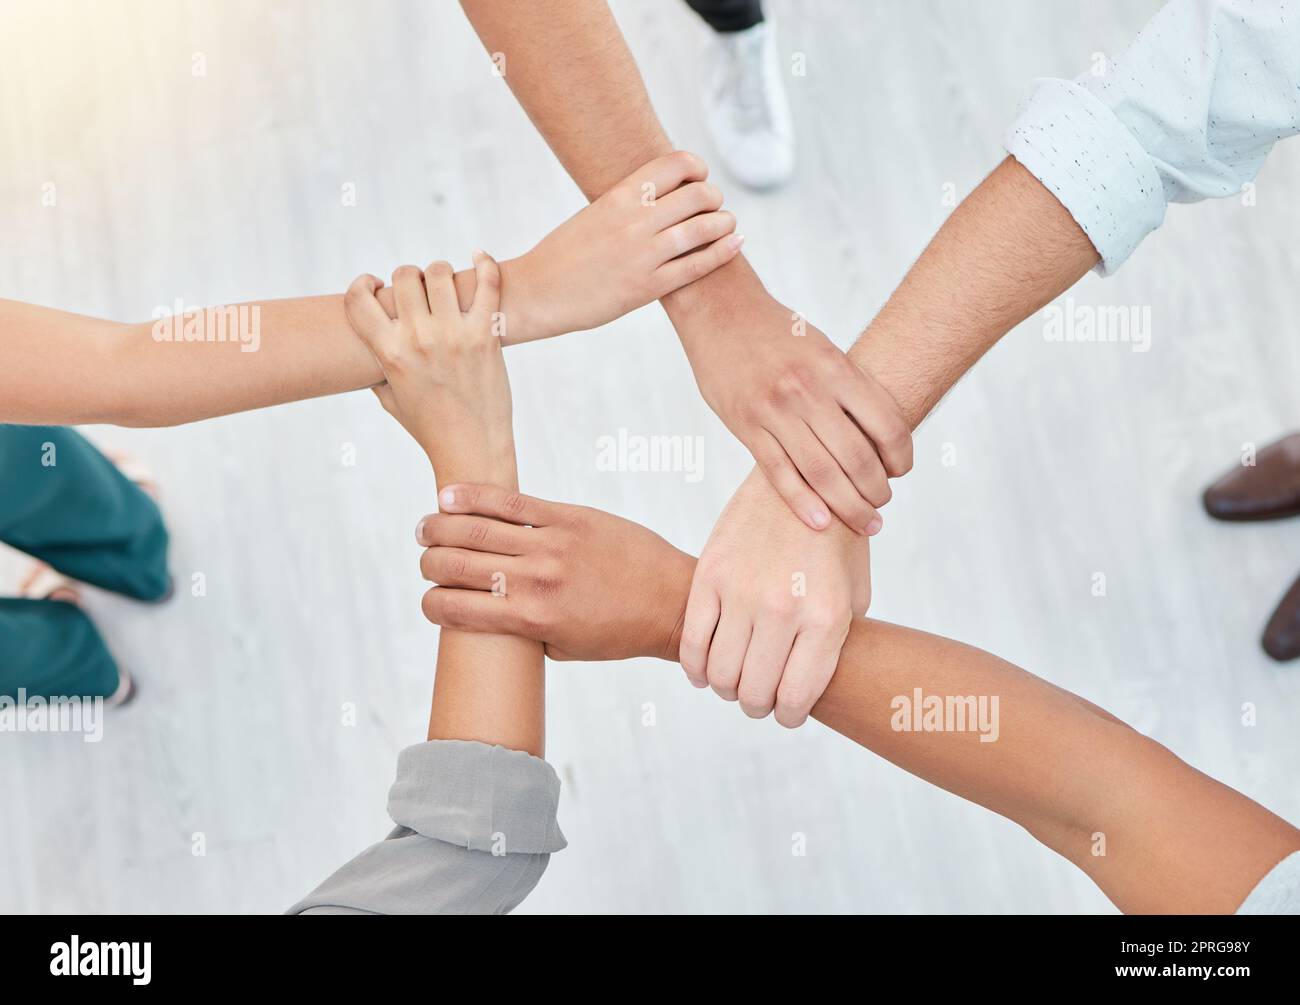 Hope, partnership and support group holding each other at community therapy session. Top view of people doing motivation, love and trust exercise while building a connection at mental health clinic. Stock Photo